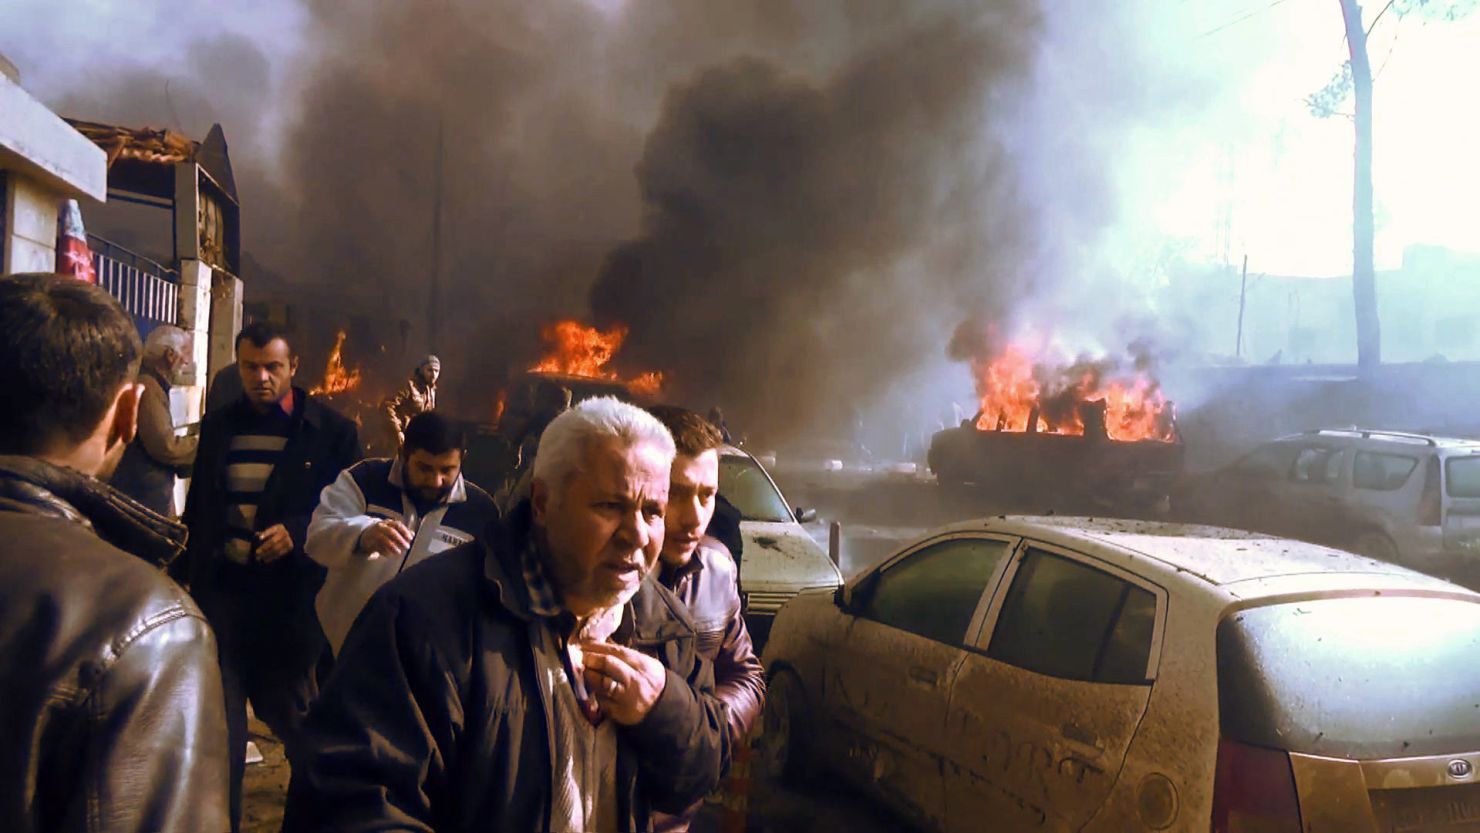 A crowd gathers Saturday after a car bomb attack in Azaz, Syria, in an image taken from AFPTV footage.